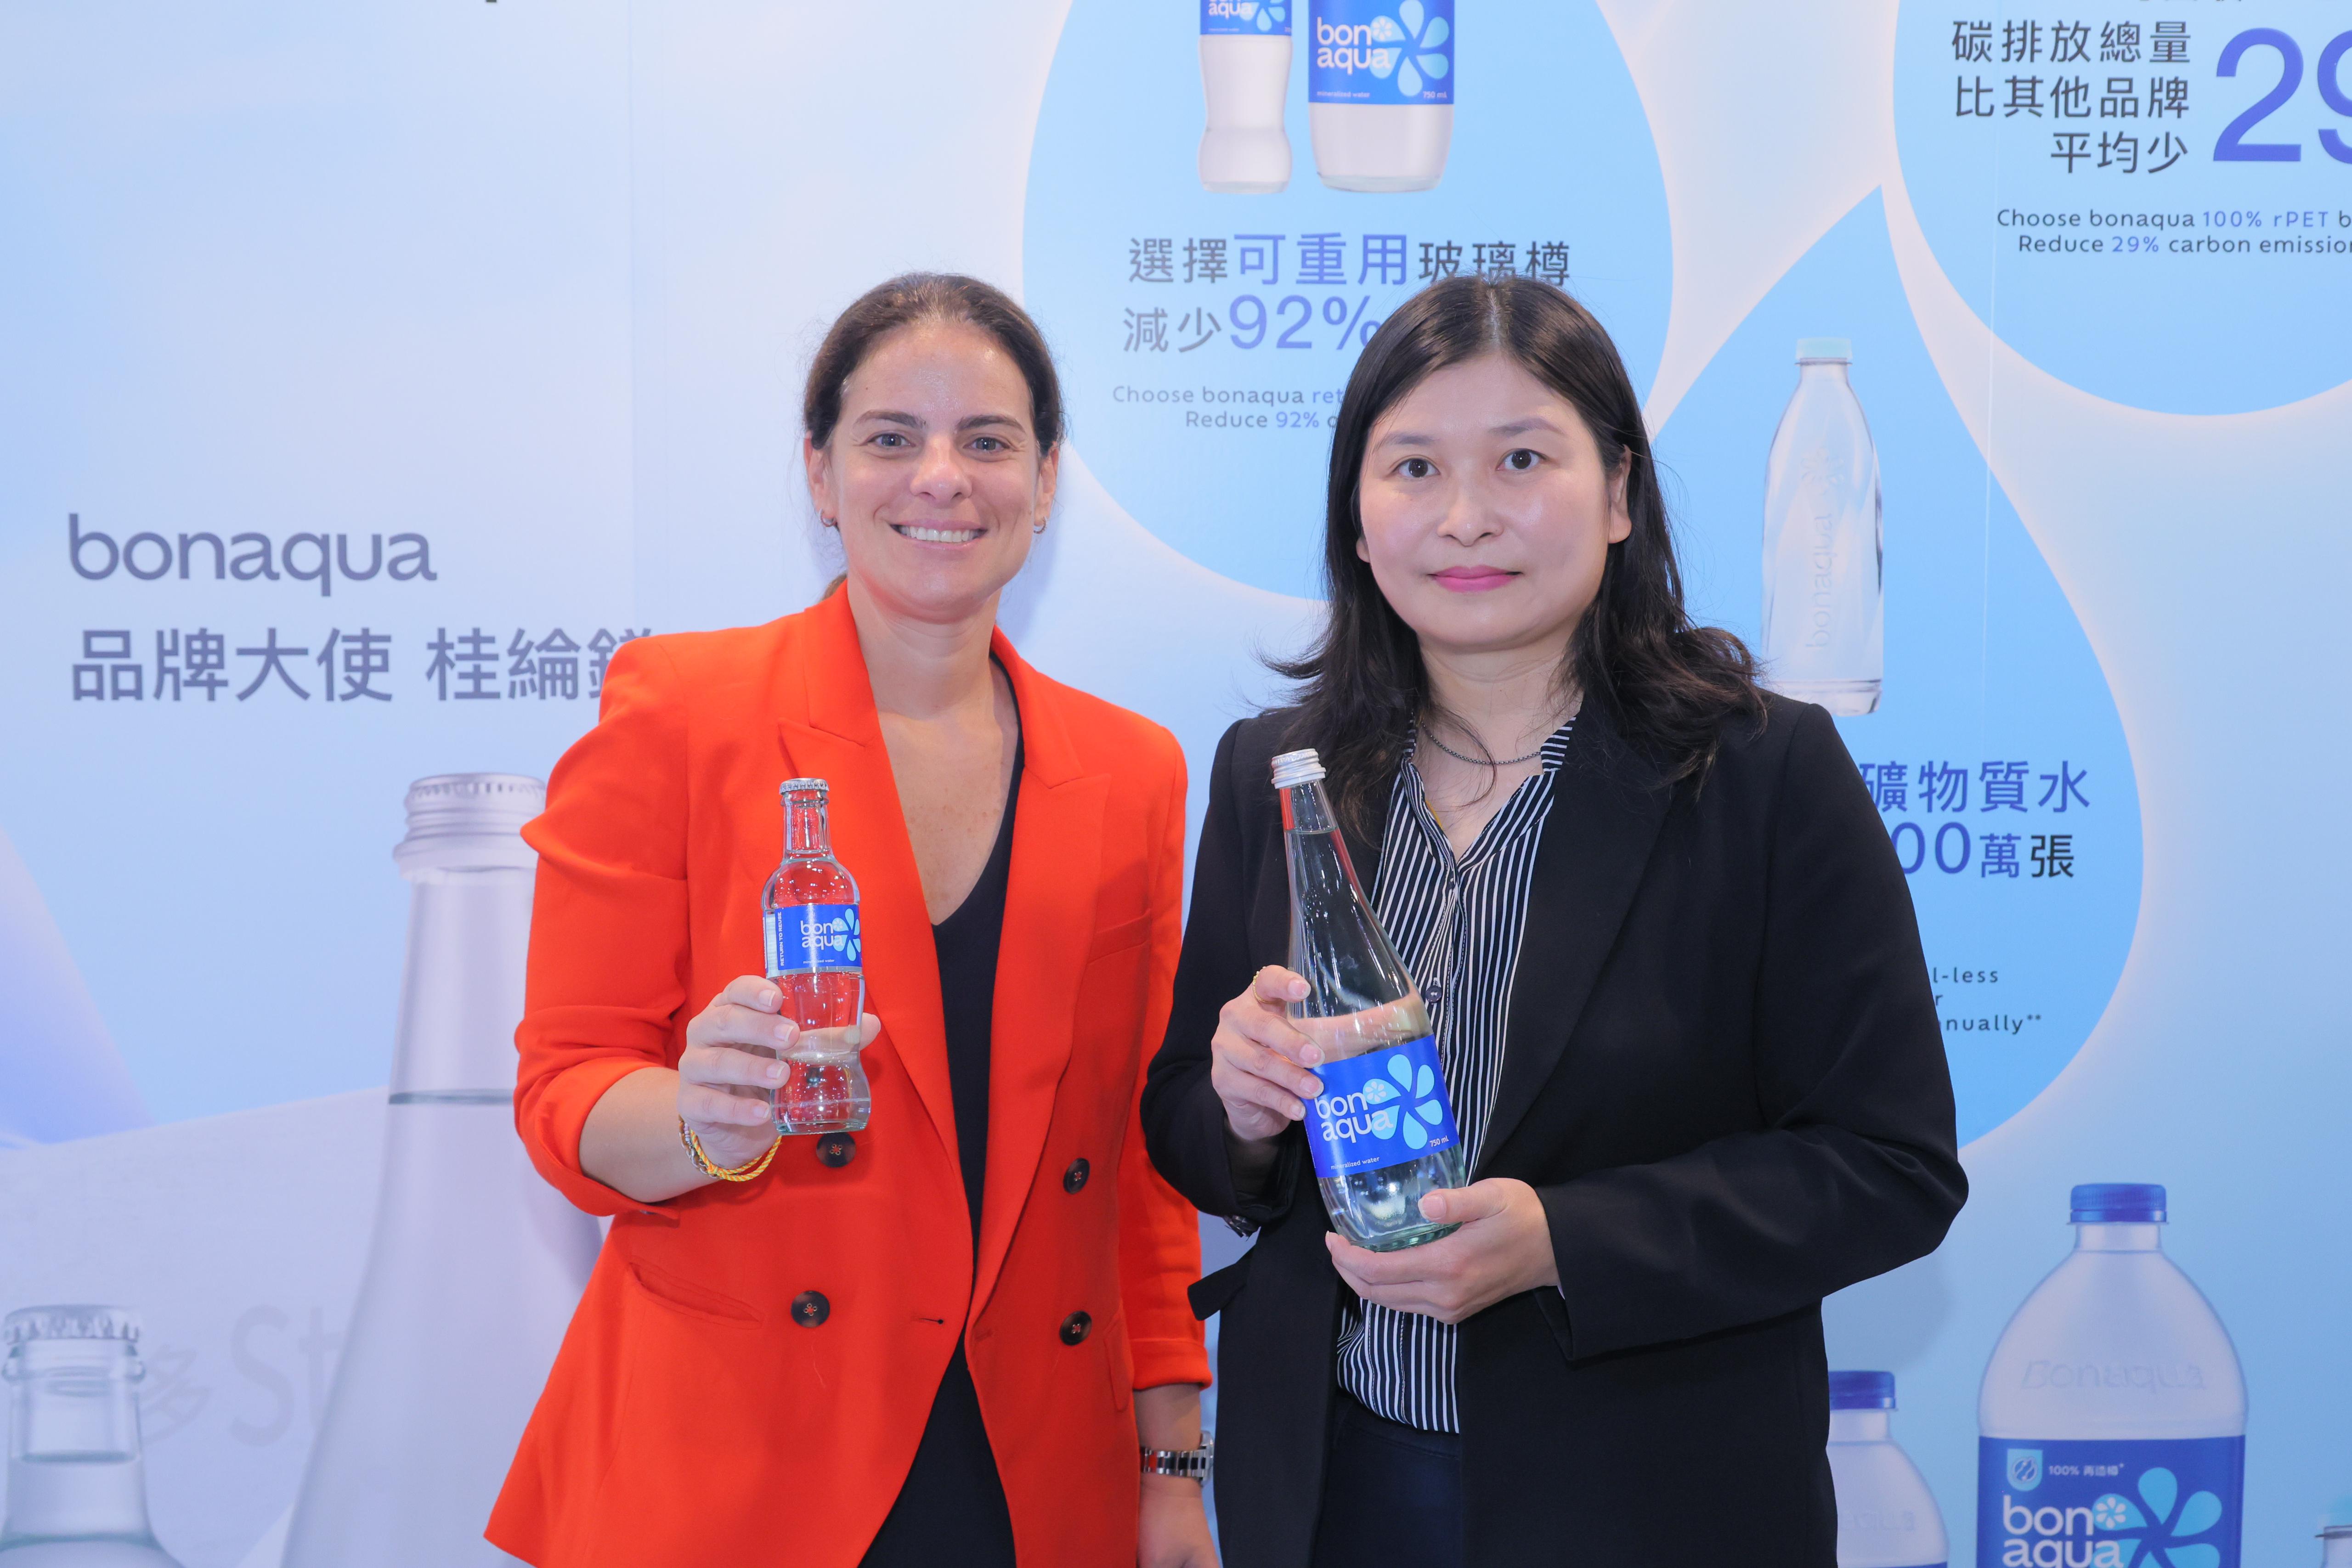 Marella Canepa Risso, Franchise Operations Director, Hong Kong and Macau at The Coca-Cola Company (Left), and Connie Yeung, General Manager of Swire Coca-Cola Hong Kong (Right), showcased bonaqua®'s newly launched mineralized water RGB at the event. They noted that orders for bonaqua® RGBs have been already received from hotels, and hopes that this collaboration with hotels will inspire other industries to prioritize sustainable development and work together for a greener future.